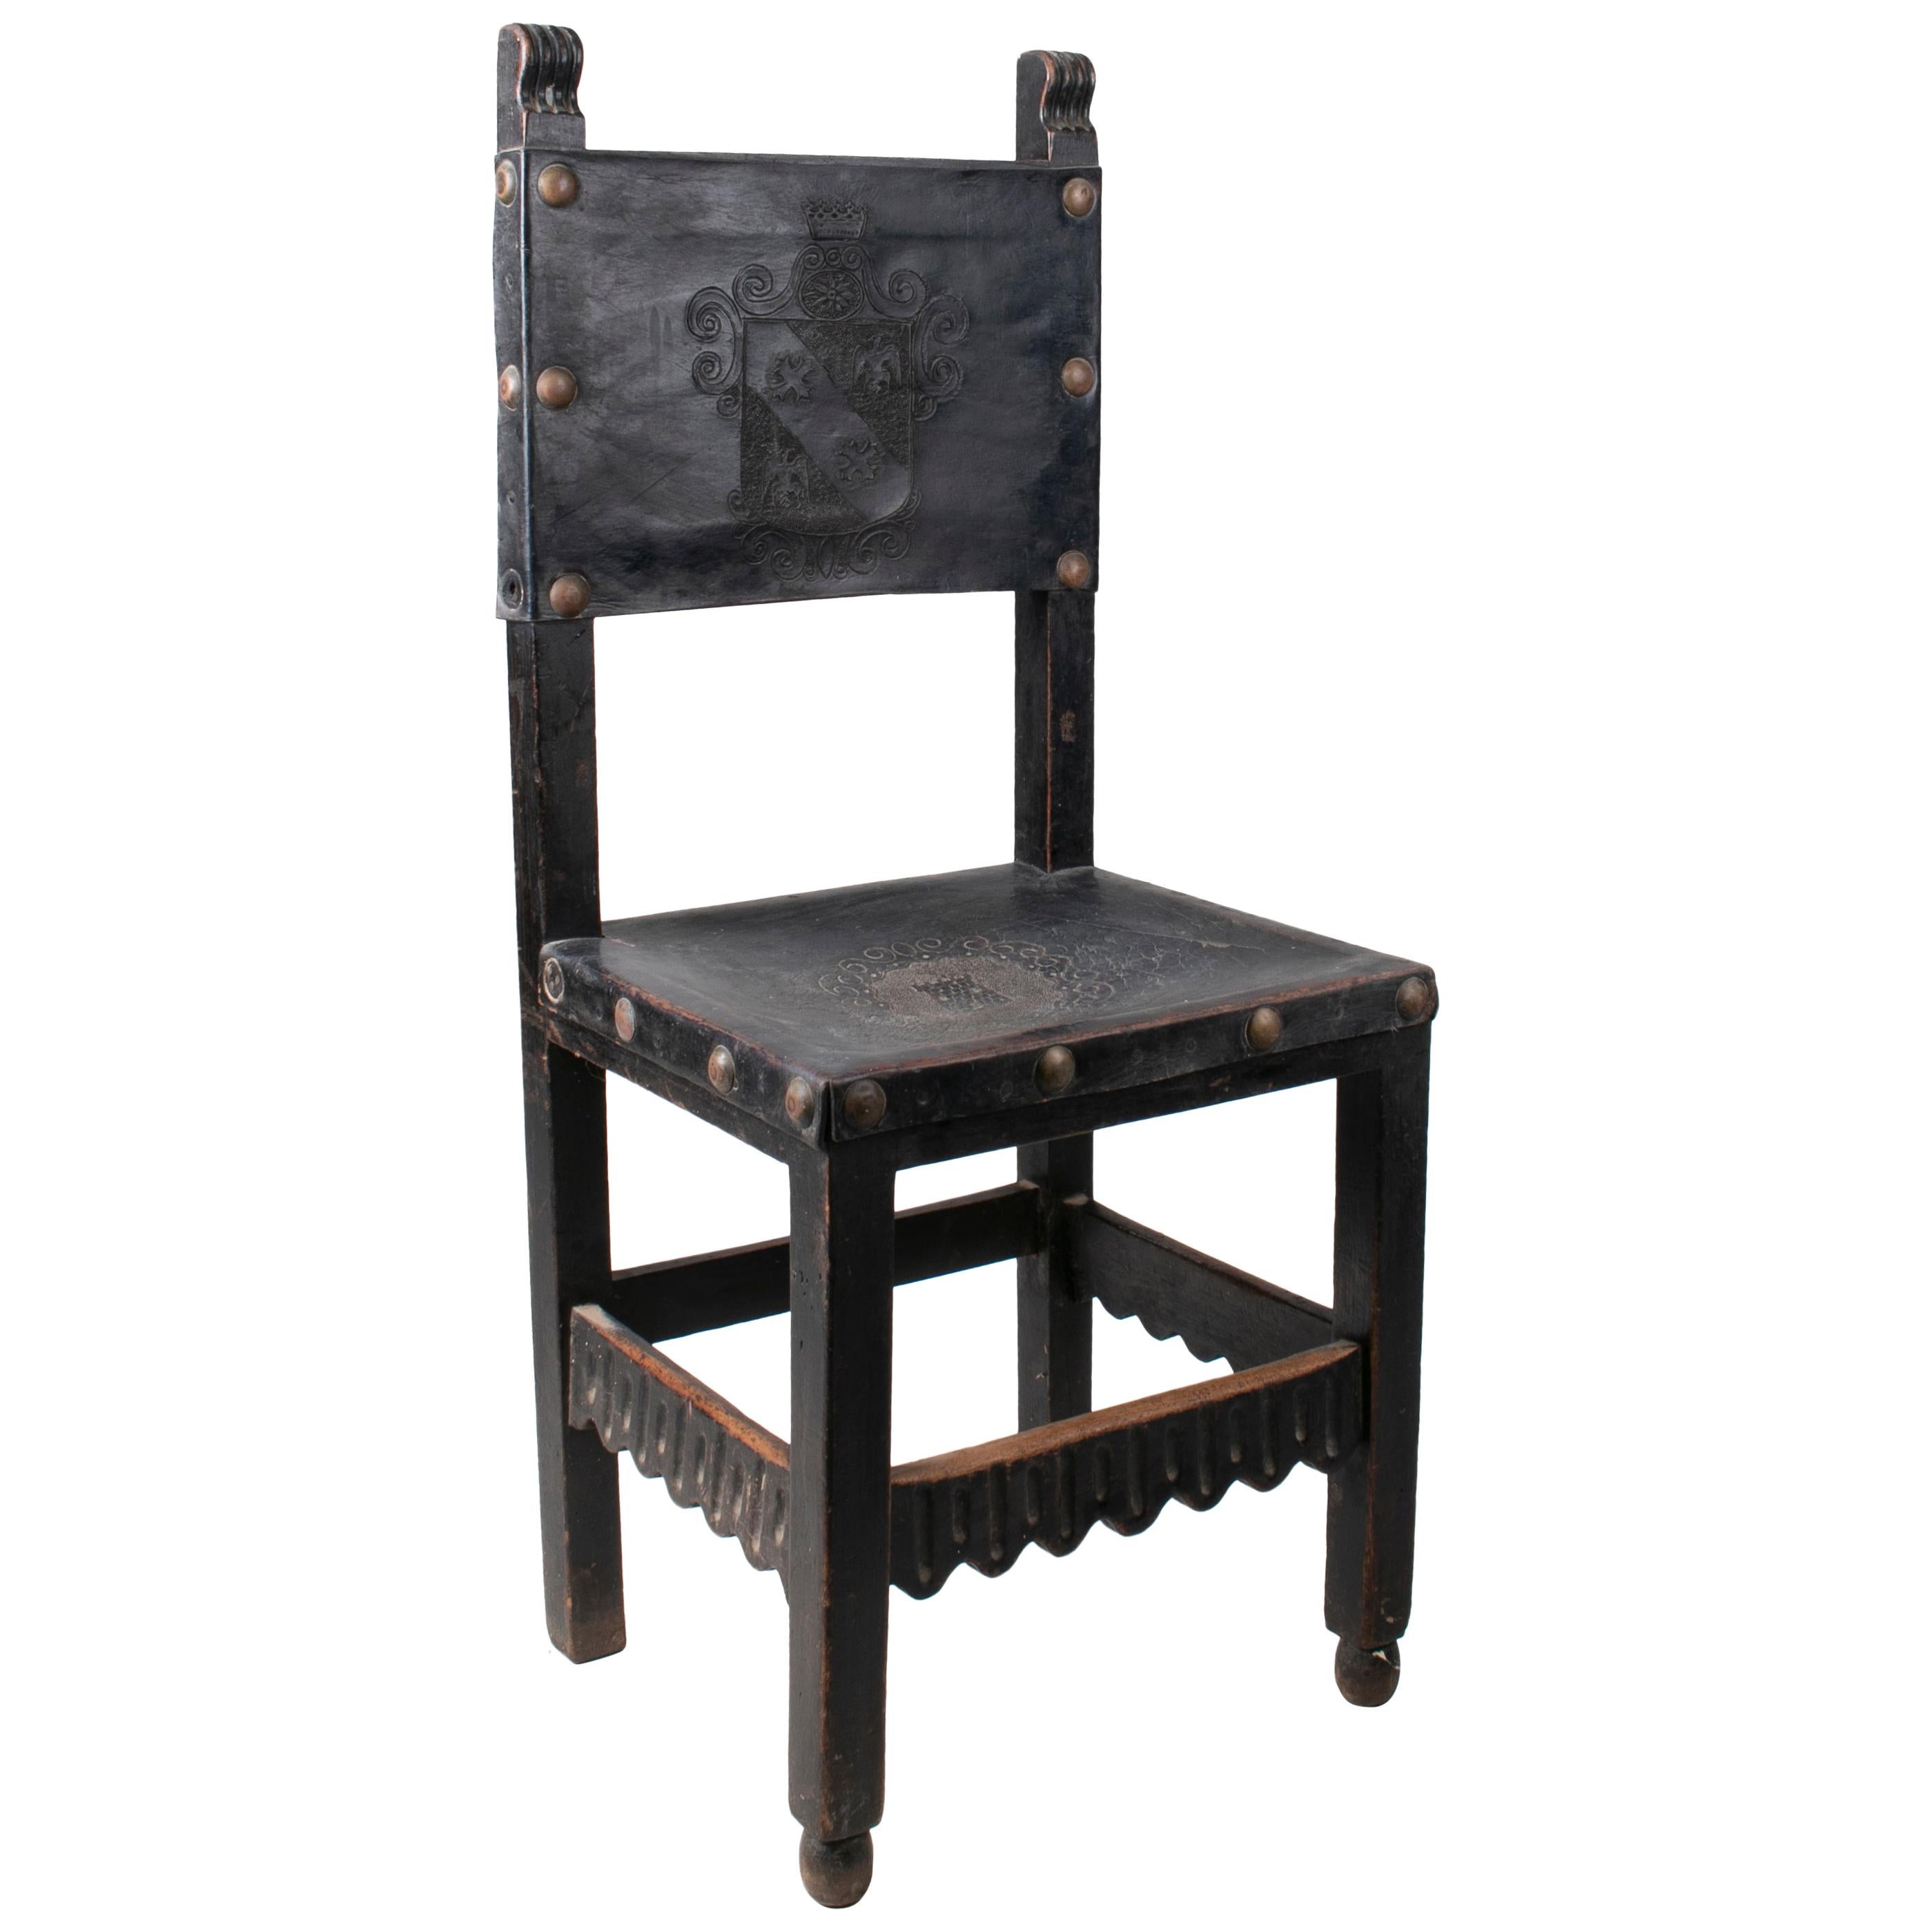 18th Century Peruvian "frailero" Leather Back and Seat Wooden Chair